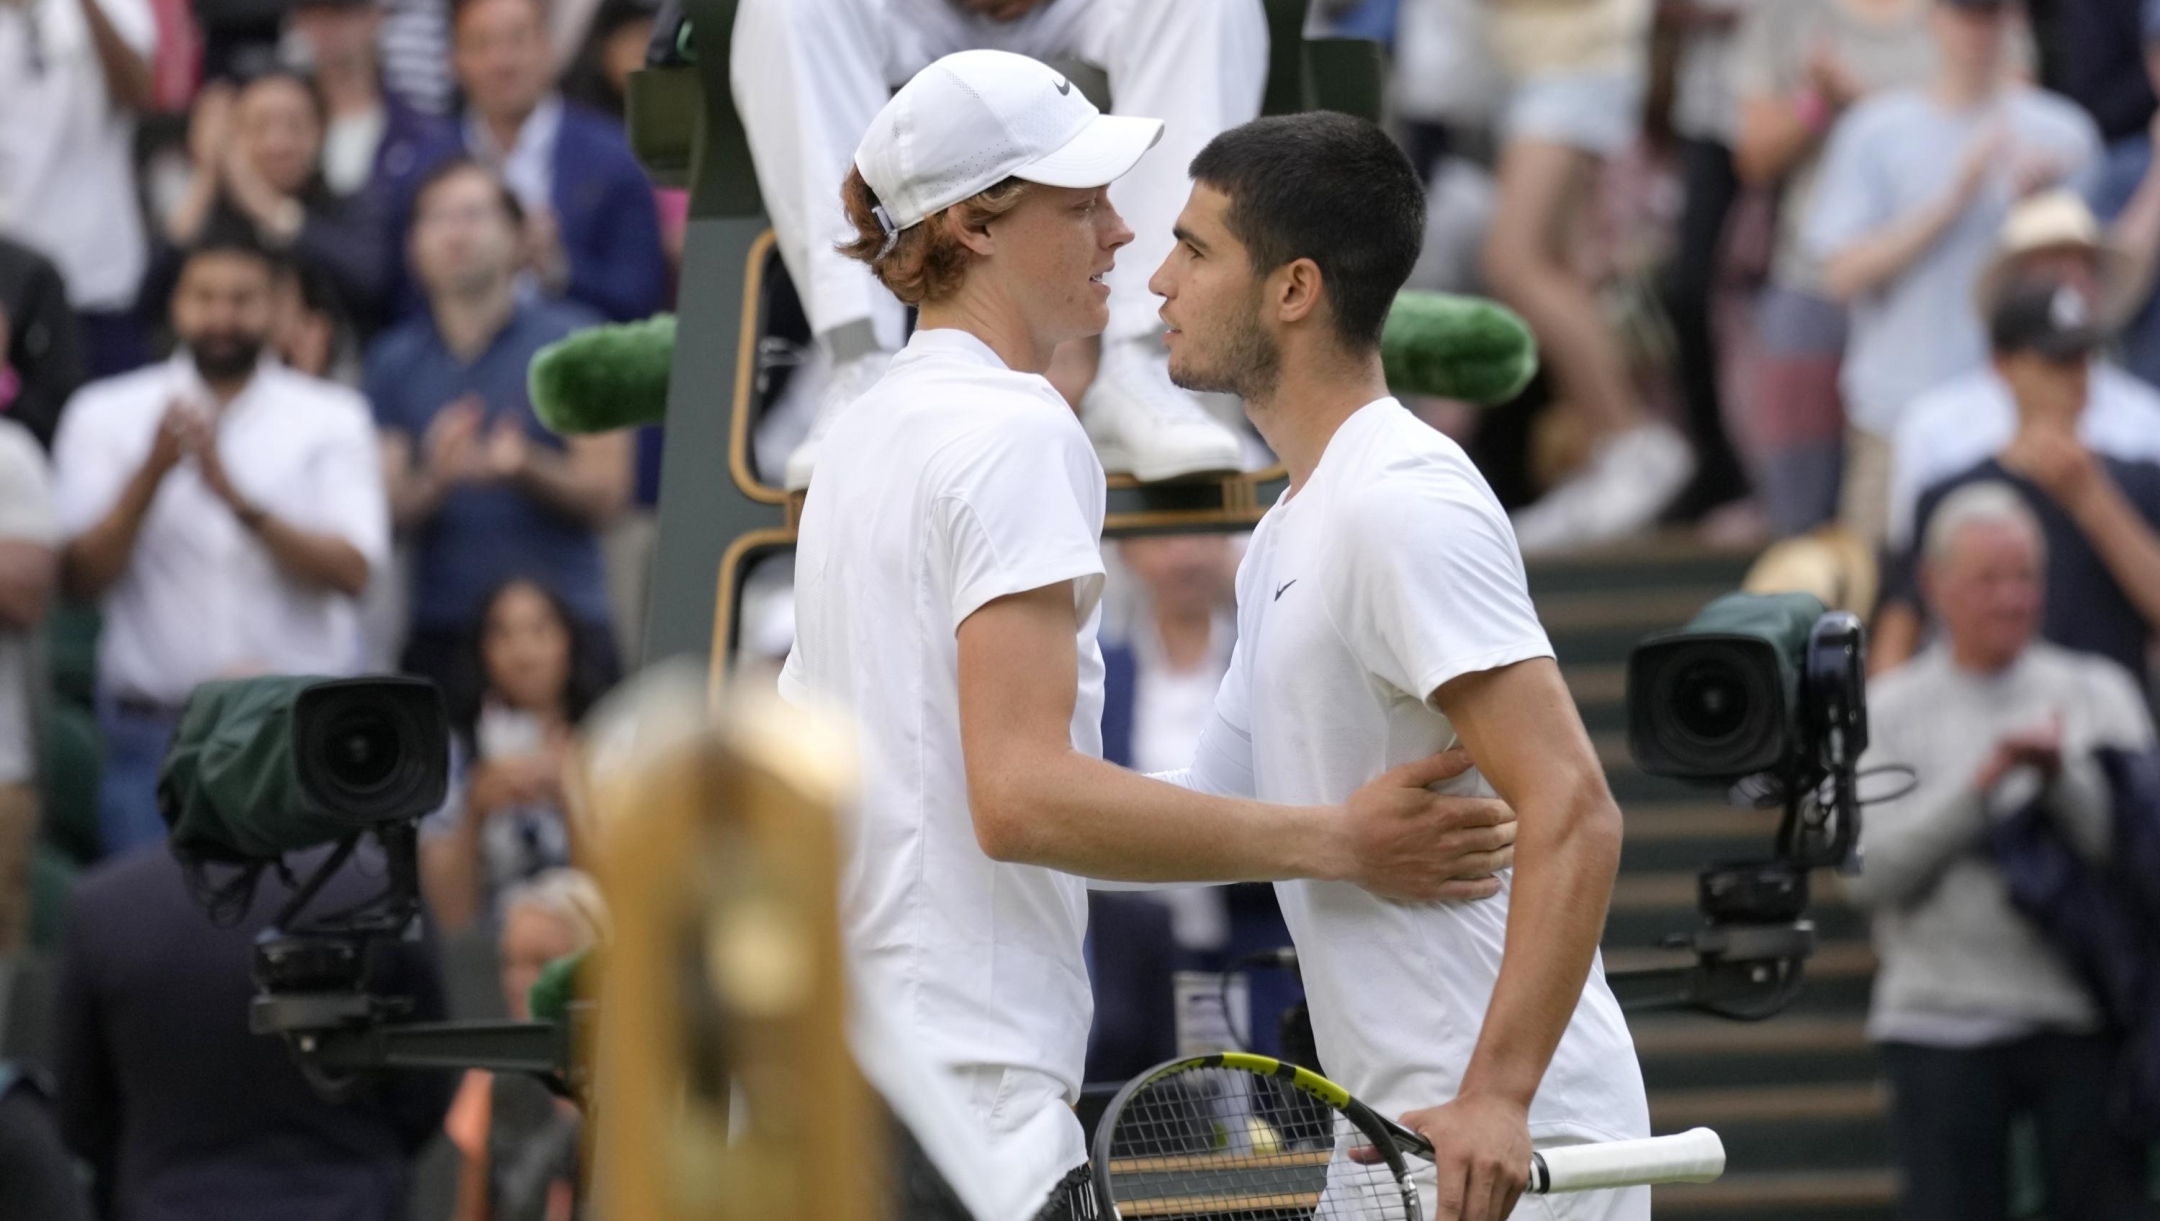 Italy's Jannik Sinner hugs Spain's Carlos Alcaraz after defeating him a men's fourth round singles match on day seven of the Wimbledon tennis championships in London, Sunday, July 3, 2022.(AP Photo/Kirsty Wigglesworth)